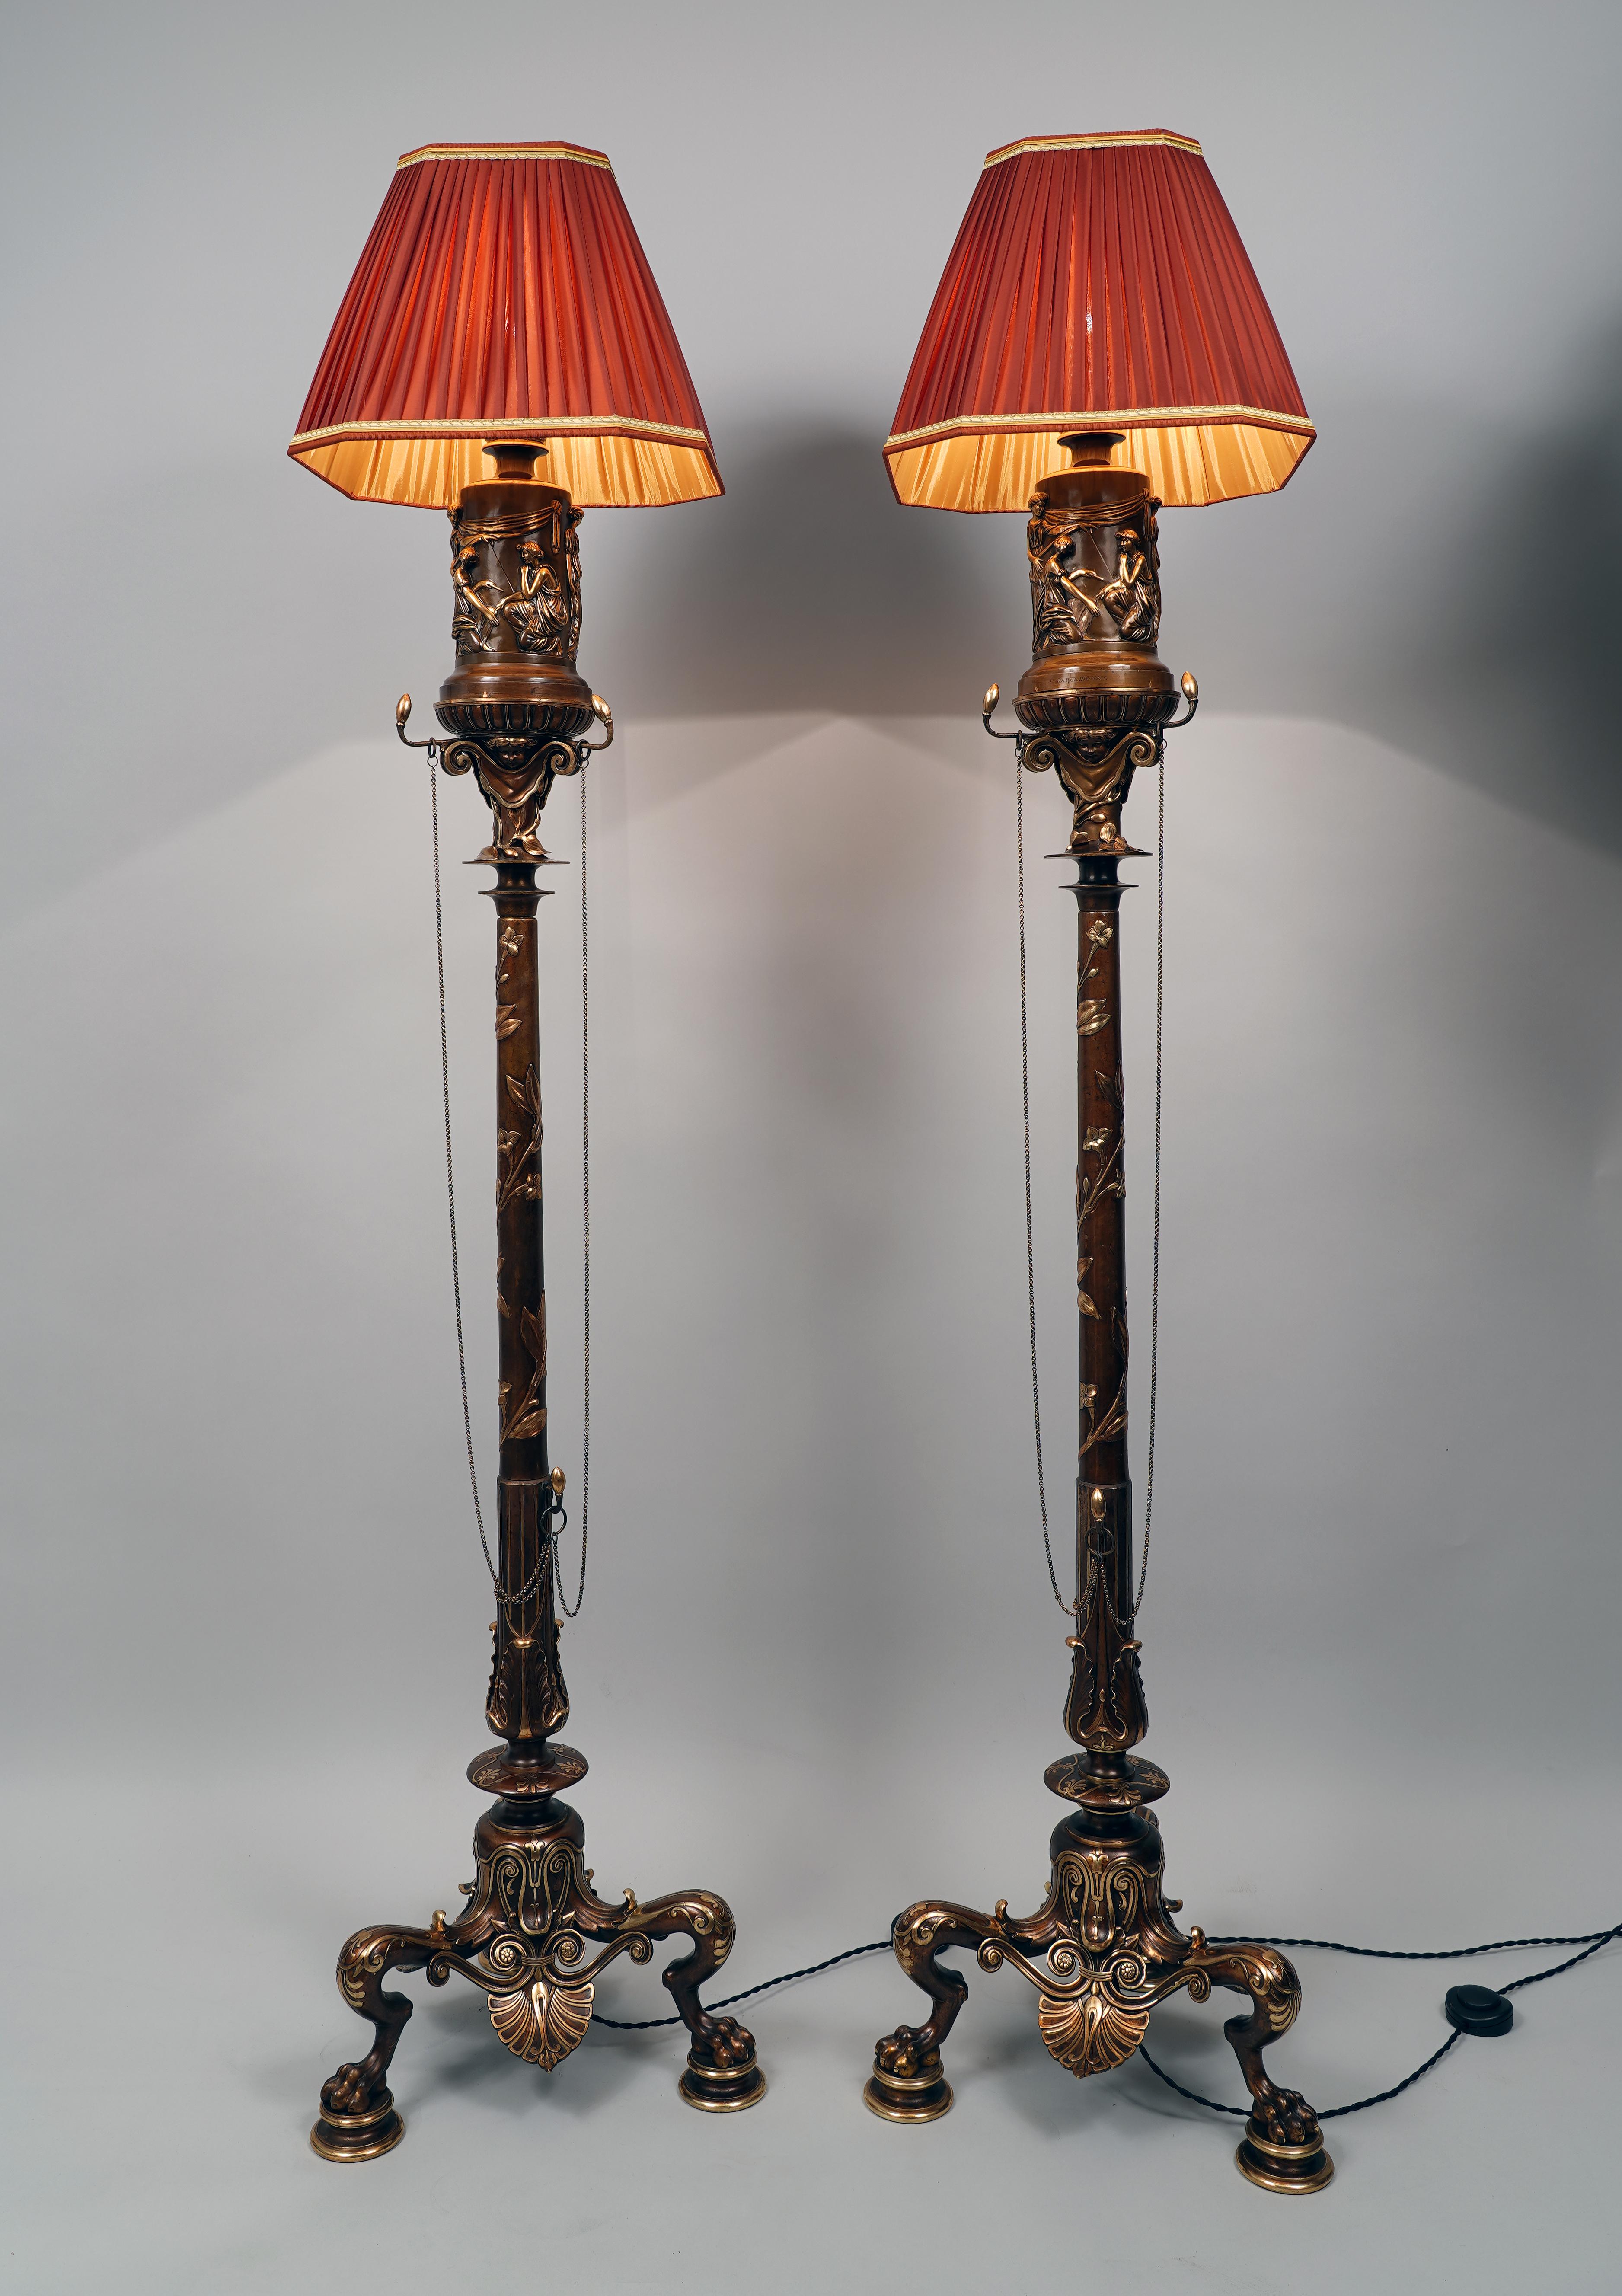 Height without/with lampshade : 168/185 cm (66,1 / 72,8 in.) ; Base : 43 x 43 cm (16,9 x 16,9 in.)

Beautiful pair of neo-Greek floor lamps in bronze with double patina, composed of cylindrical lamps, decorated on the body with a rotating frieze